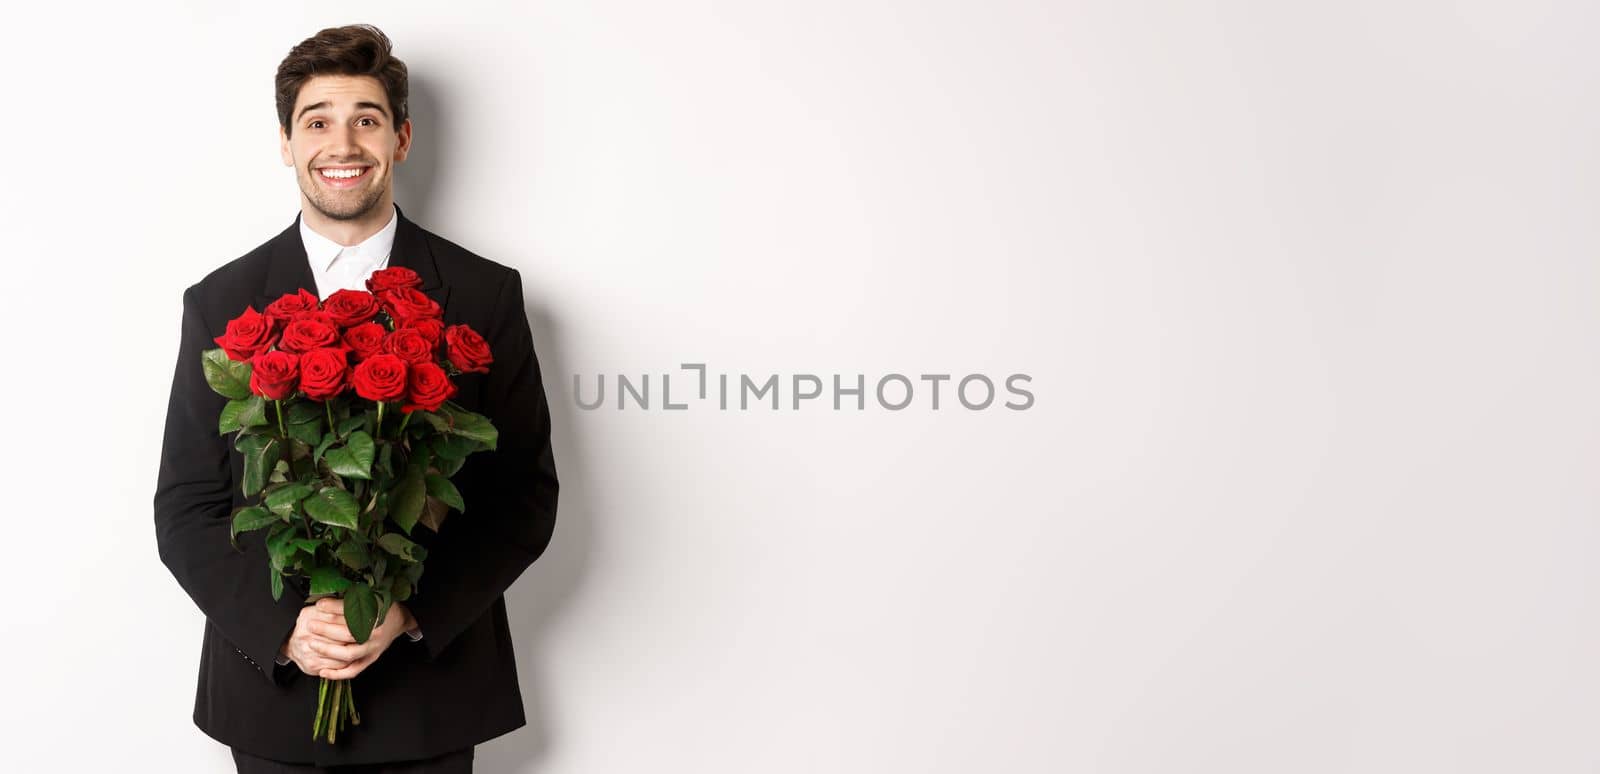 Image of handsome man in black suit, holding bouquet of roses and smiling, standing against white background.